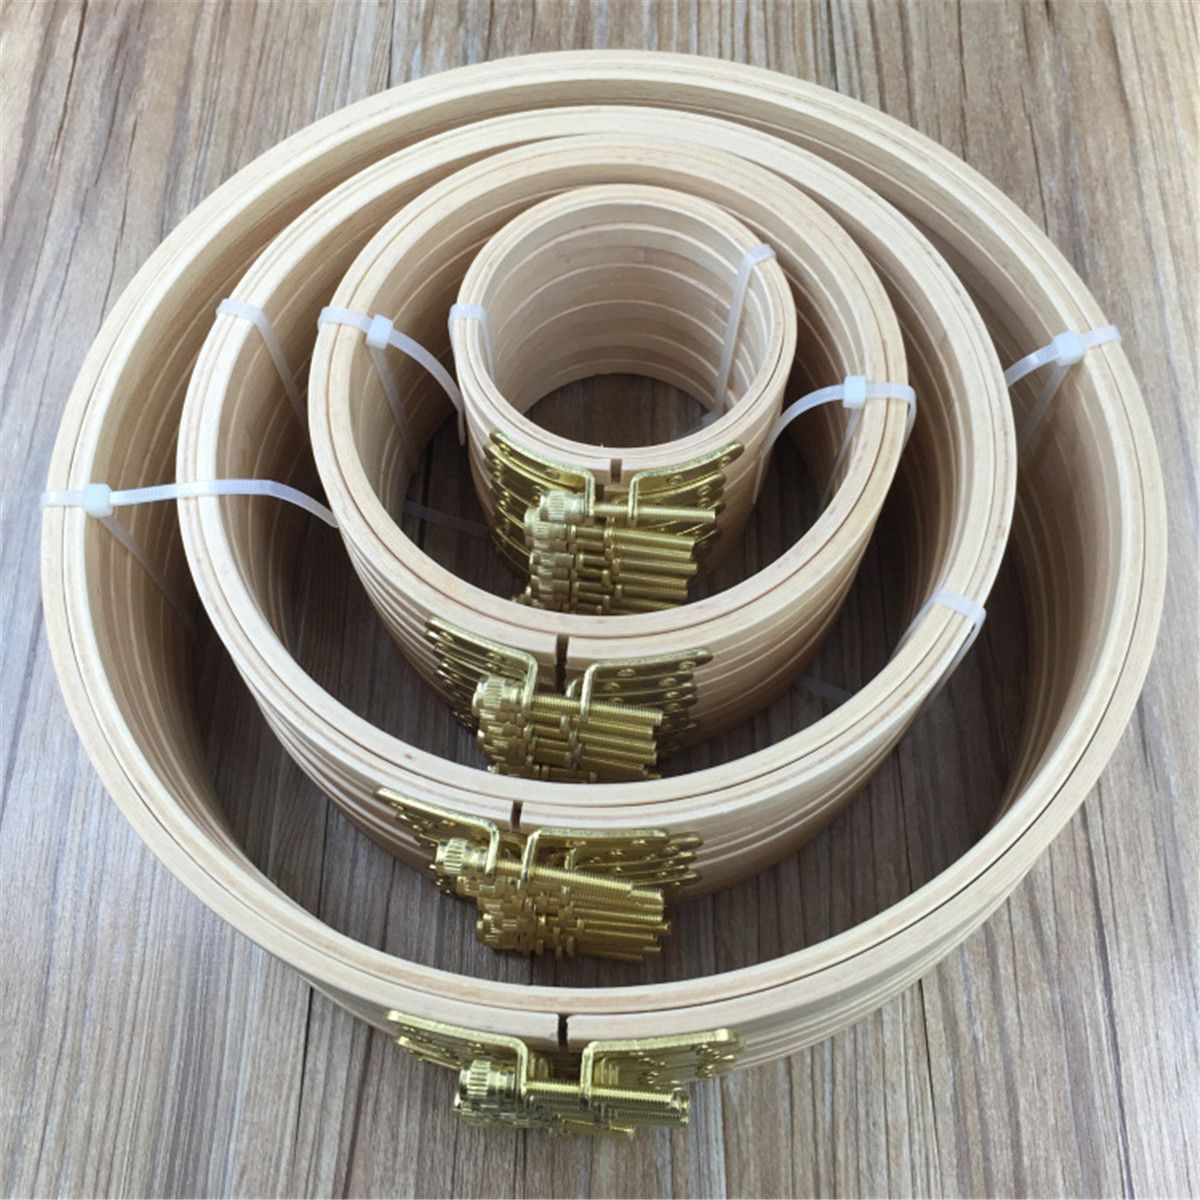 7-Size-Wooden-Embroidery-Hoops-Cross-Stitch-Sewing-Tools-Craft-Ring-Frame-Machine-Tool-1332370